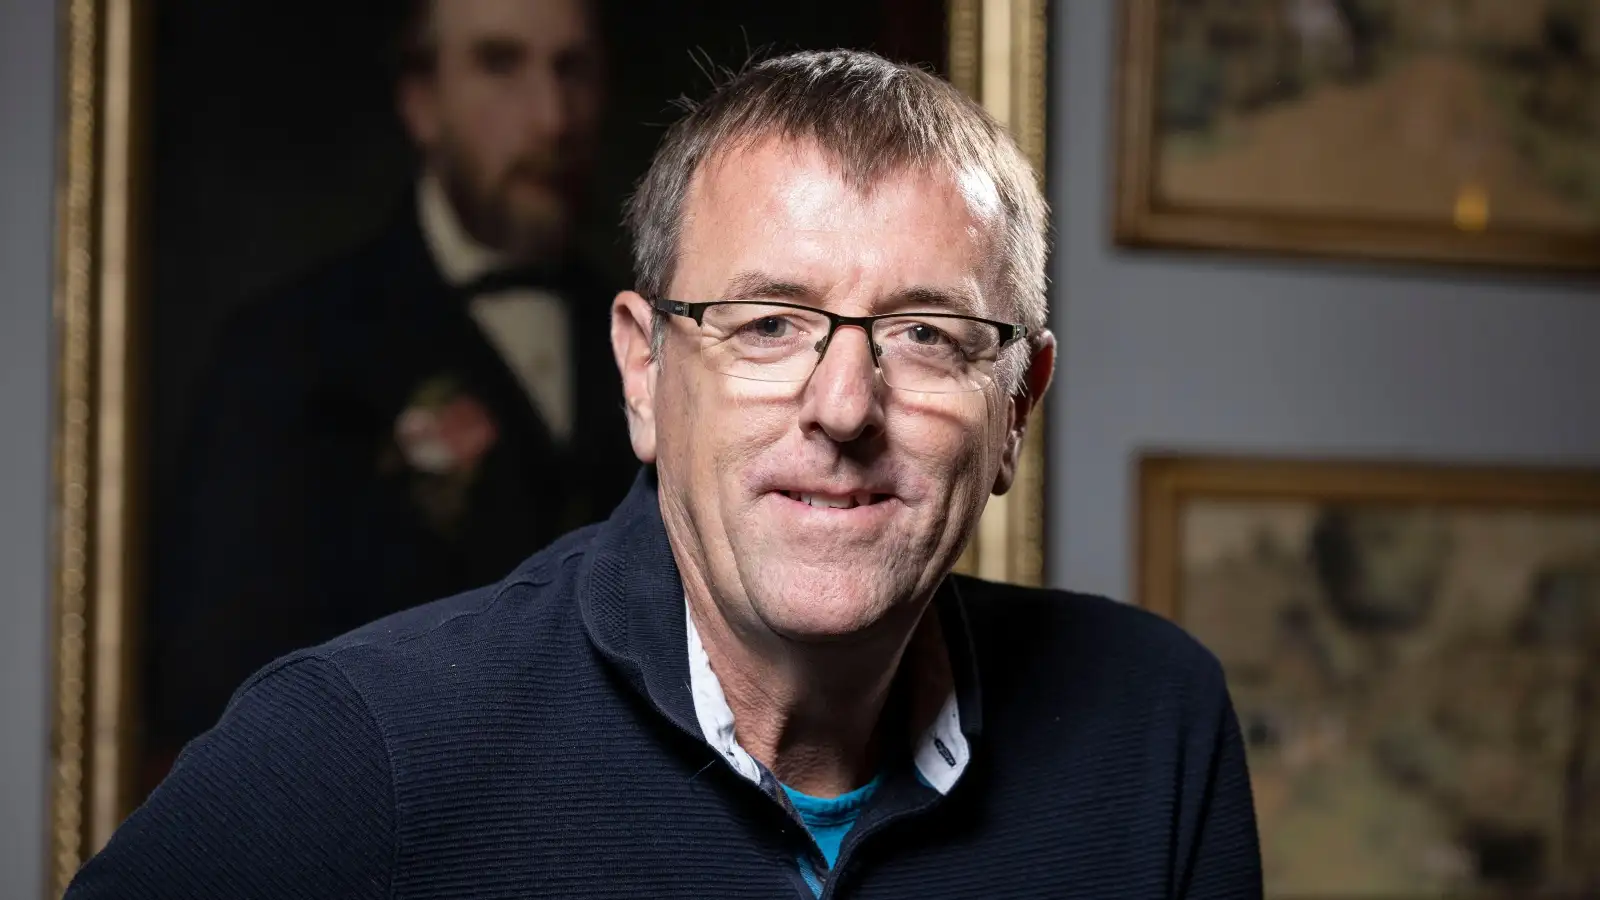 13 of Matt Le Tissier’s wildest conspiracy theories from Bill Gates to the ‘communist takeover’